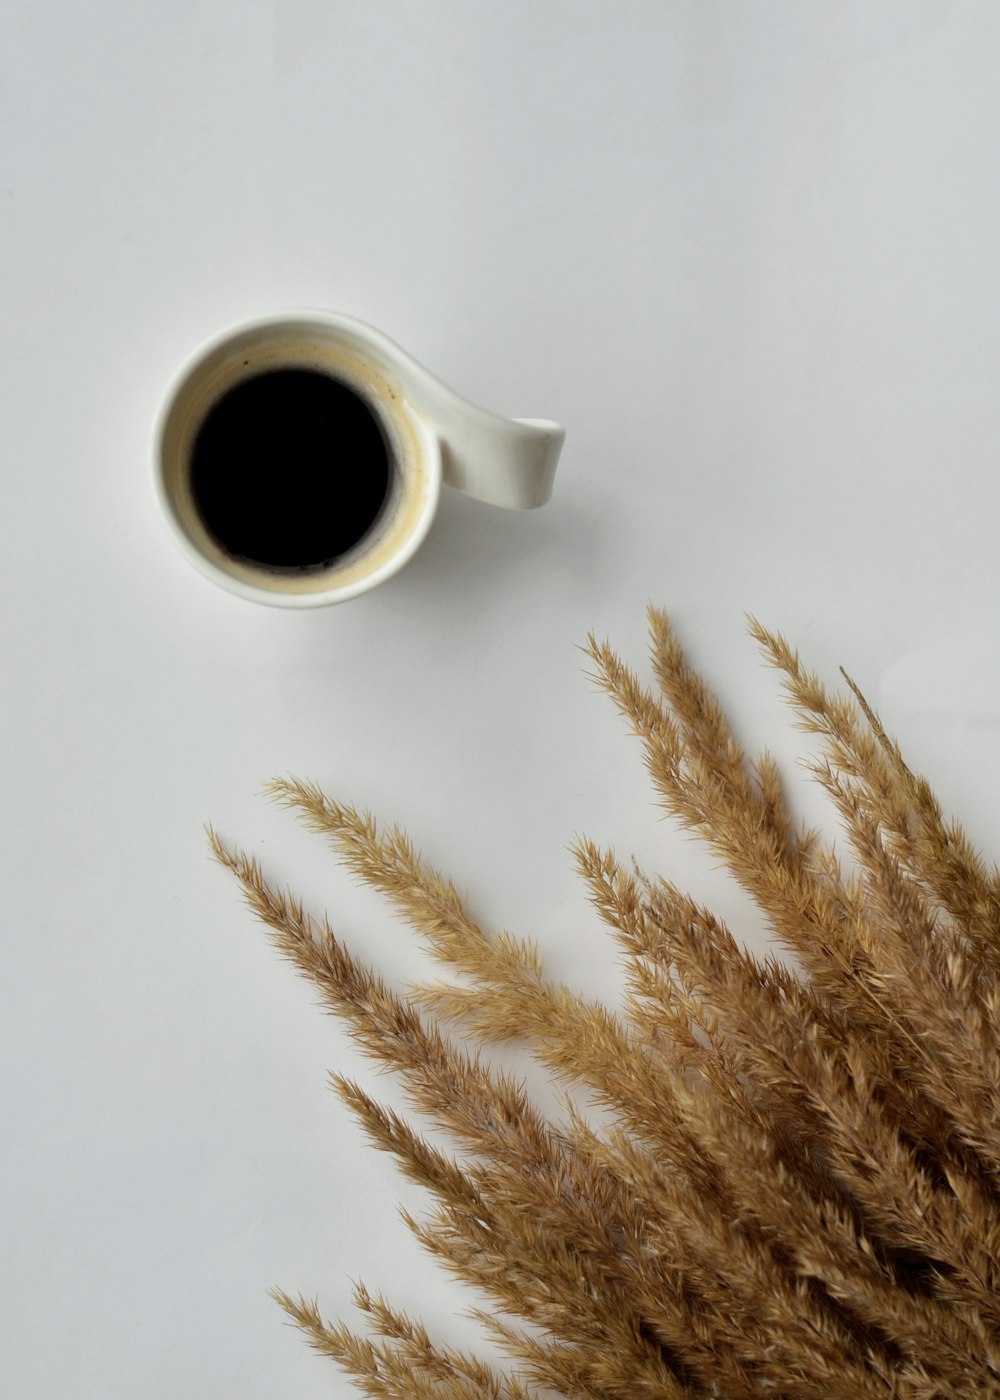 a cup of coffee sitting next to a bunch of dry grass